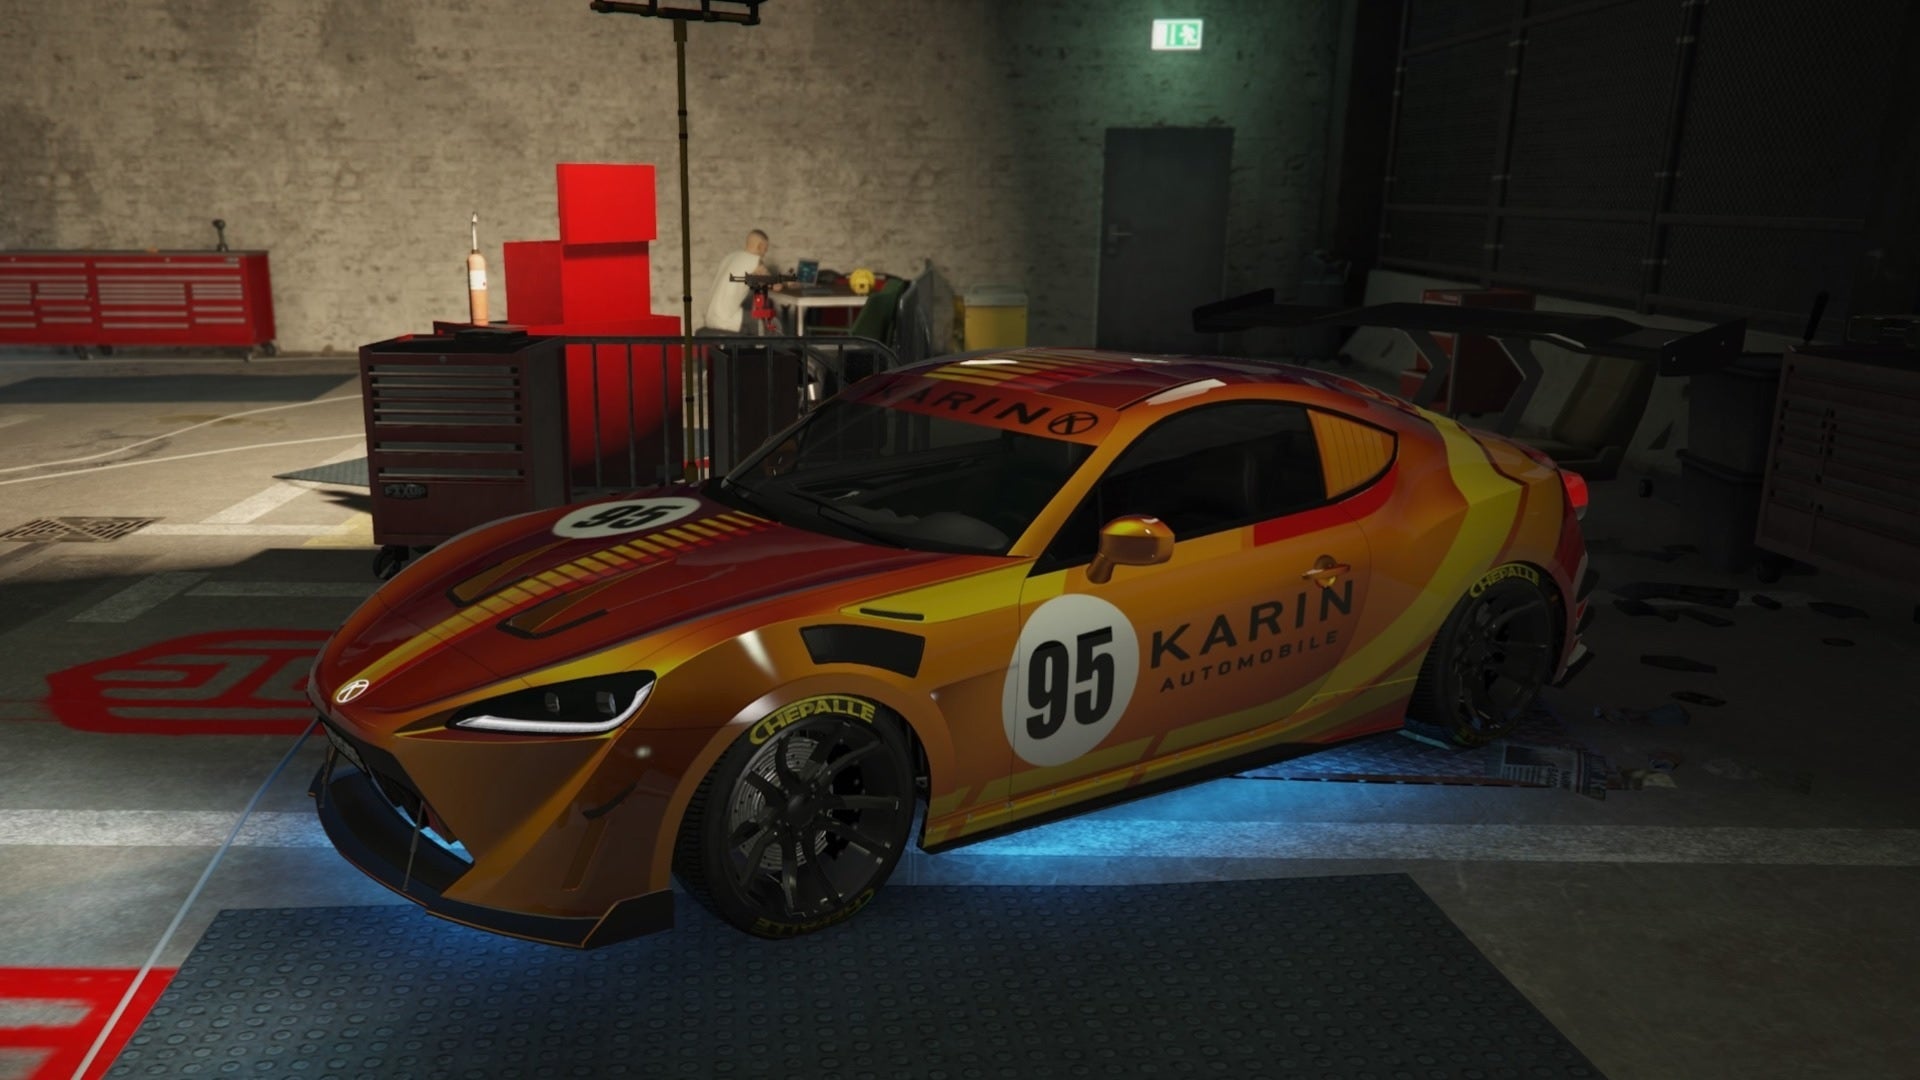 The S95 (hao's special works) in GTA Online.